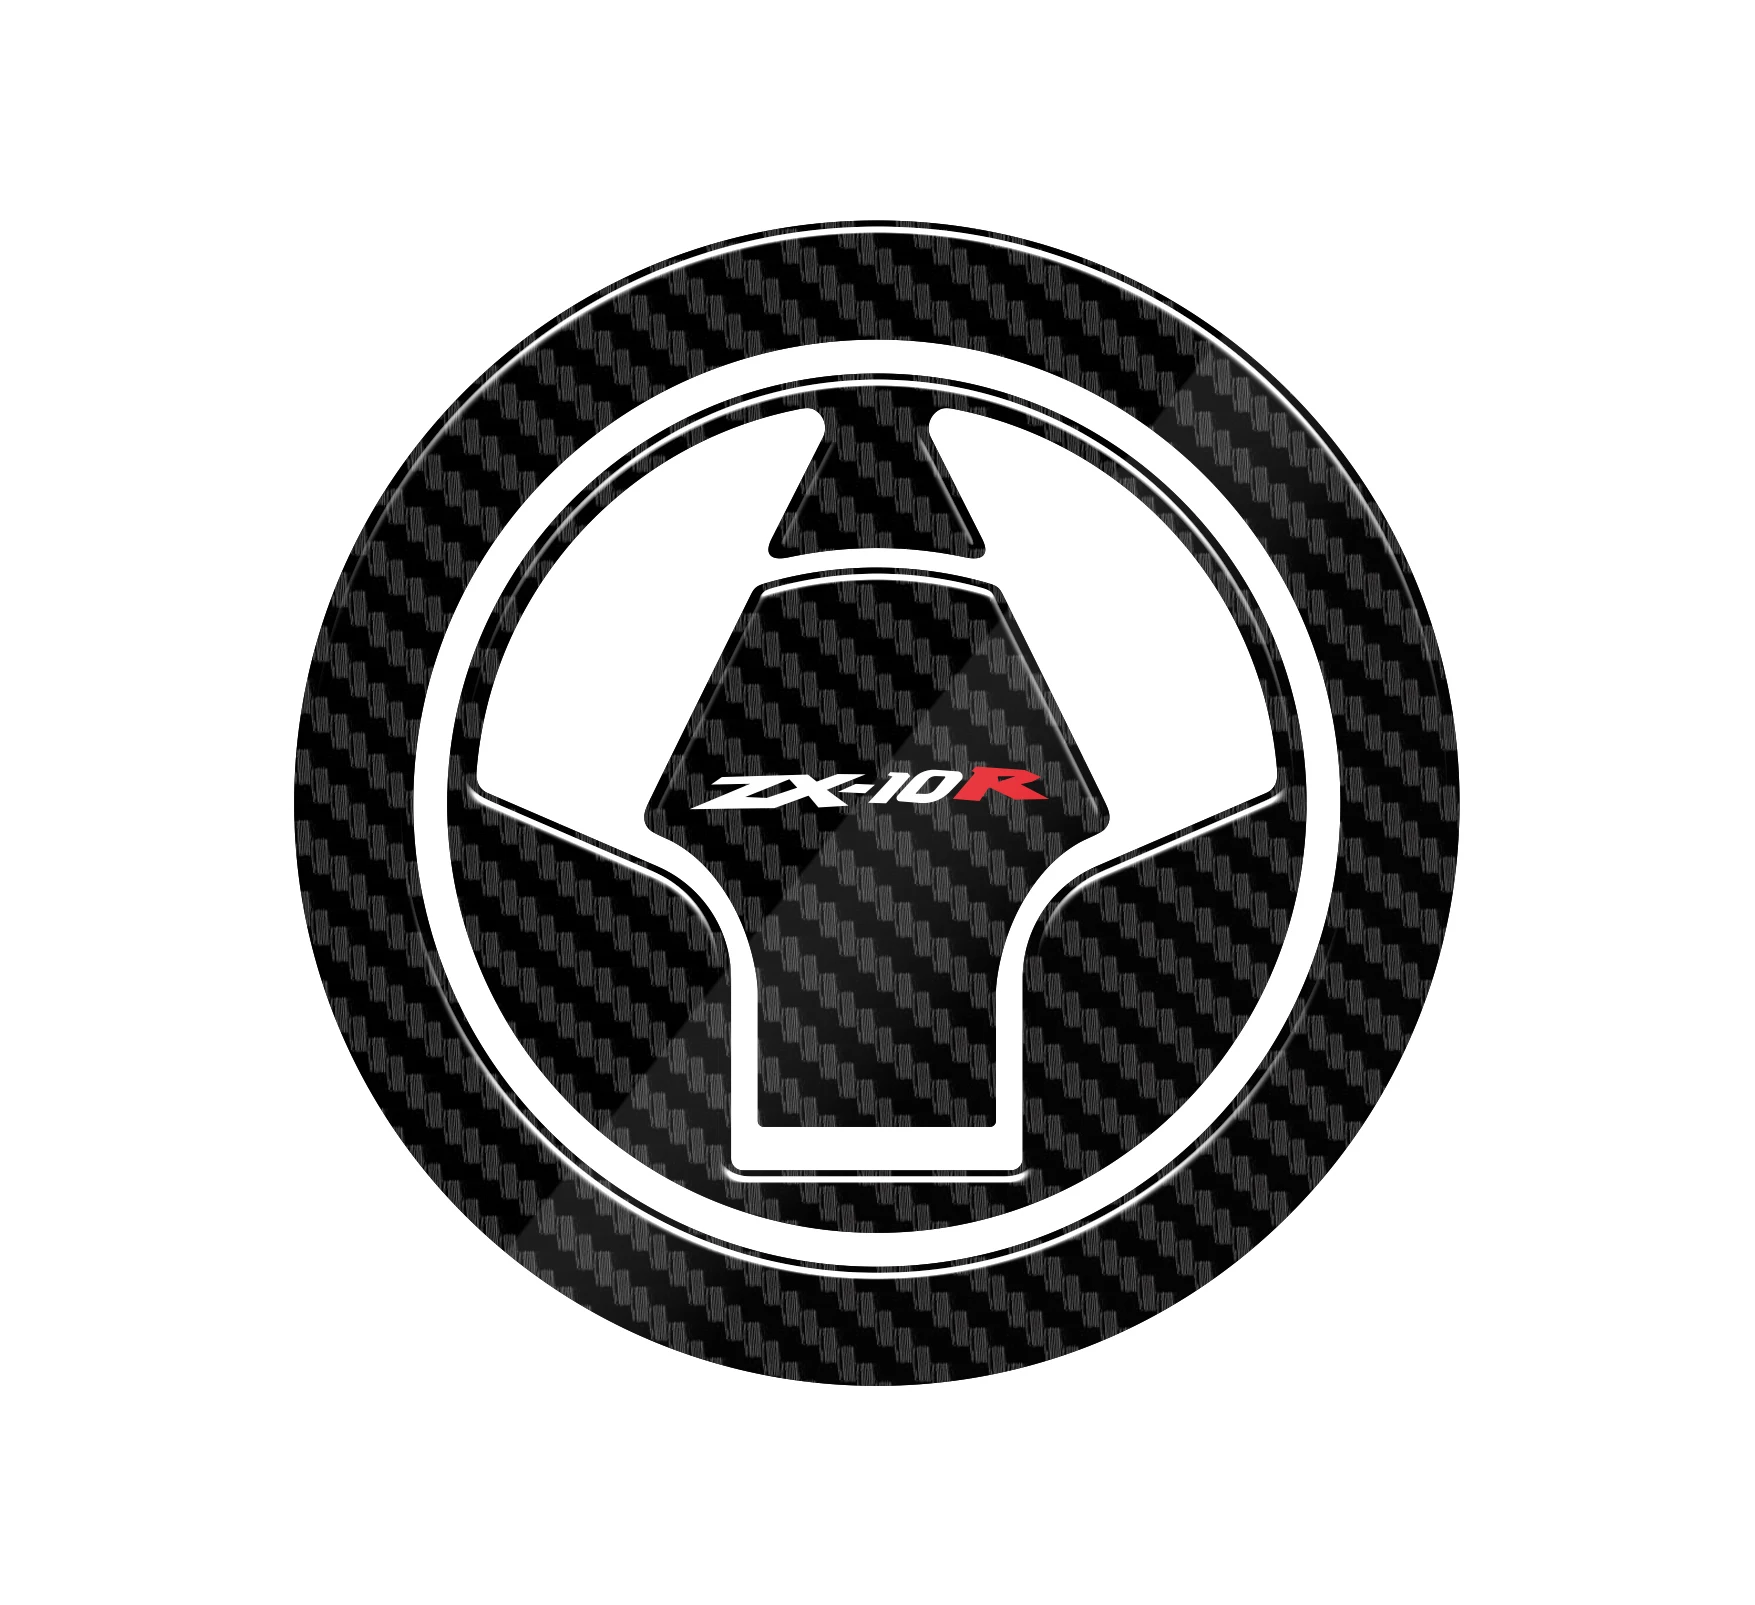 Motorcycle Fuel Gas Cap cover Tank Protector Pad Sticker Decal For KAWASAKI ZX10R ZX 10R ZX-10R 2006-2015 07 08 09 10 11 12 13